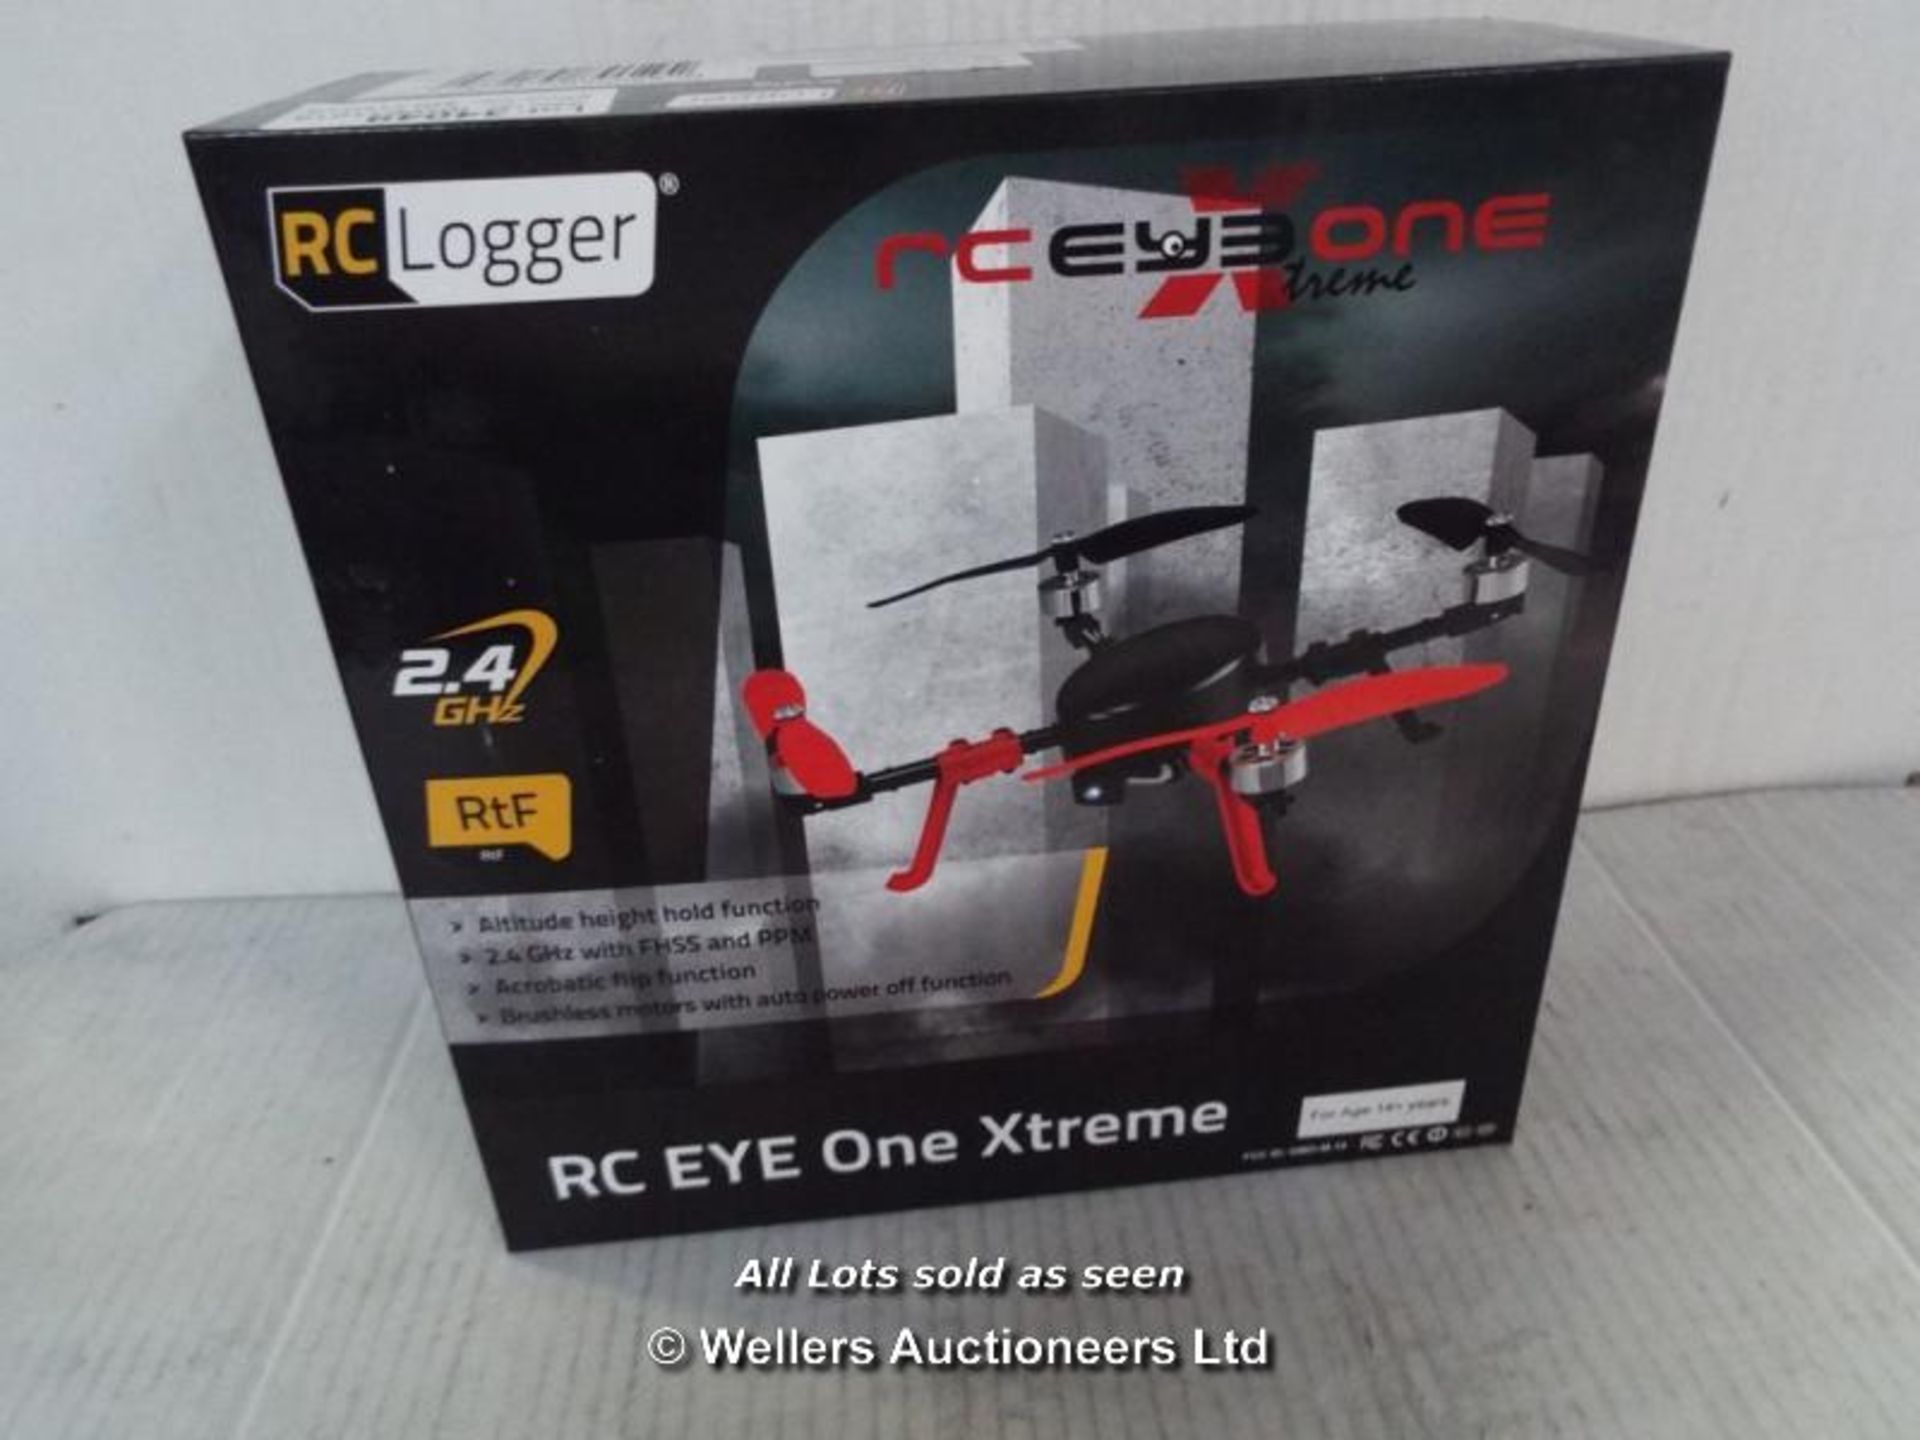 RC LOGGER RC EYE ONE EXTREME / GRADE: RETURNS / BOXED (DC2) [AISLE 19] - Image 2 of 2